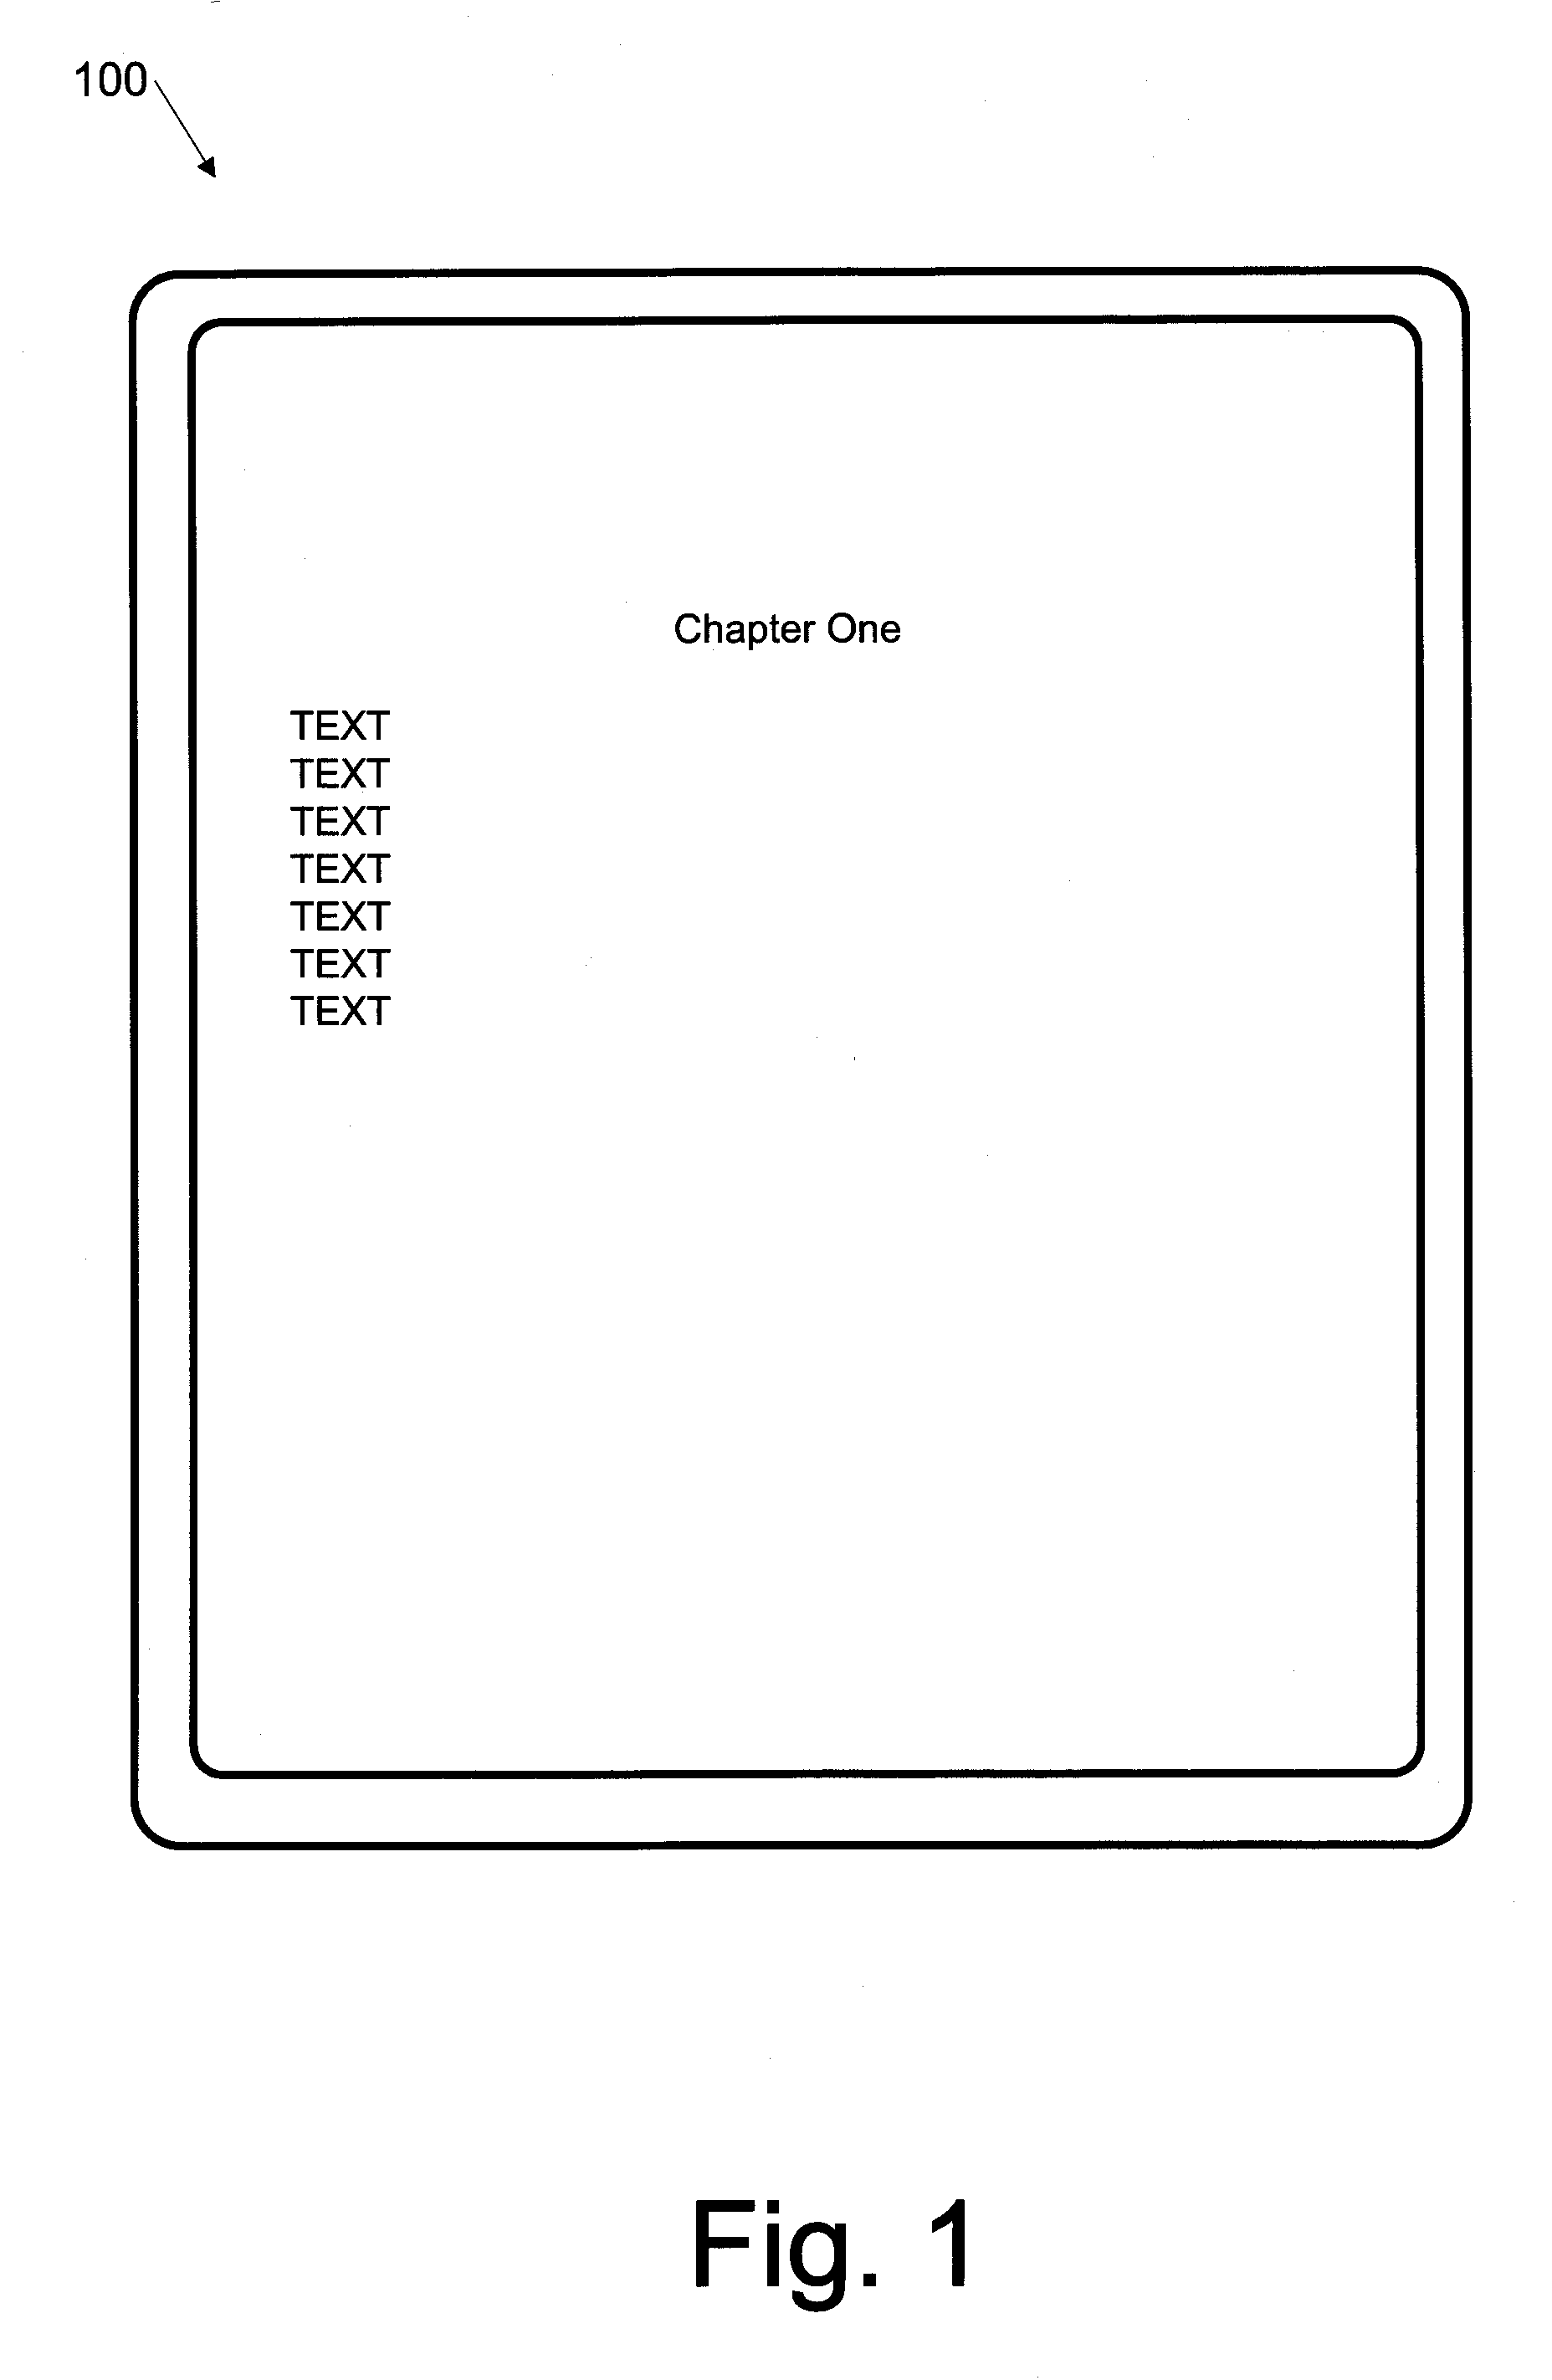 Flexible Electronic Device and Method of Manufacture